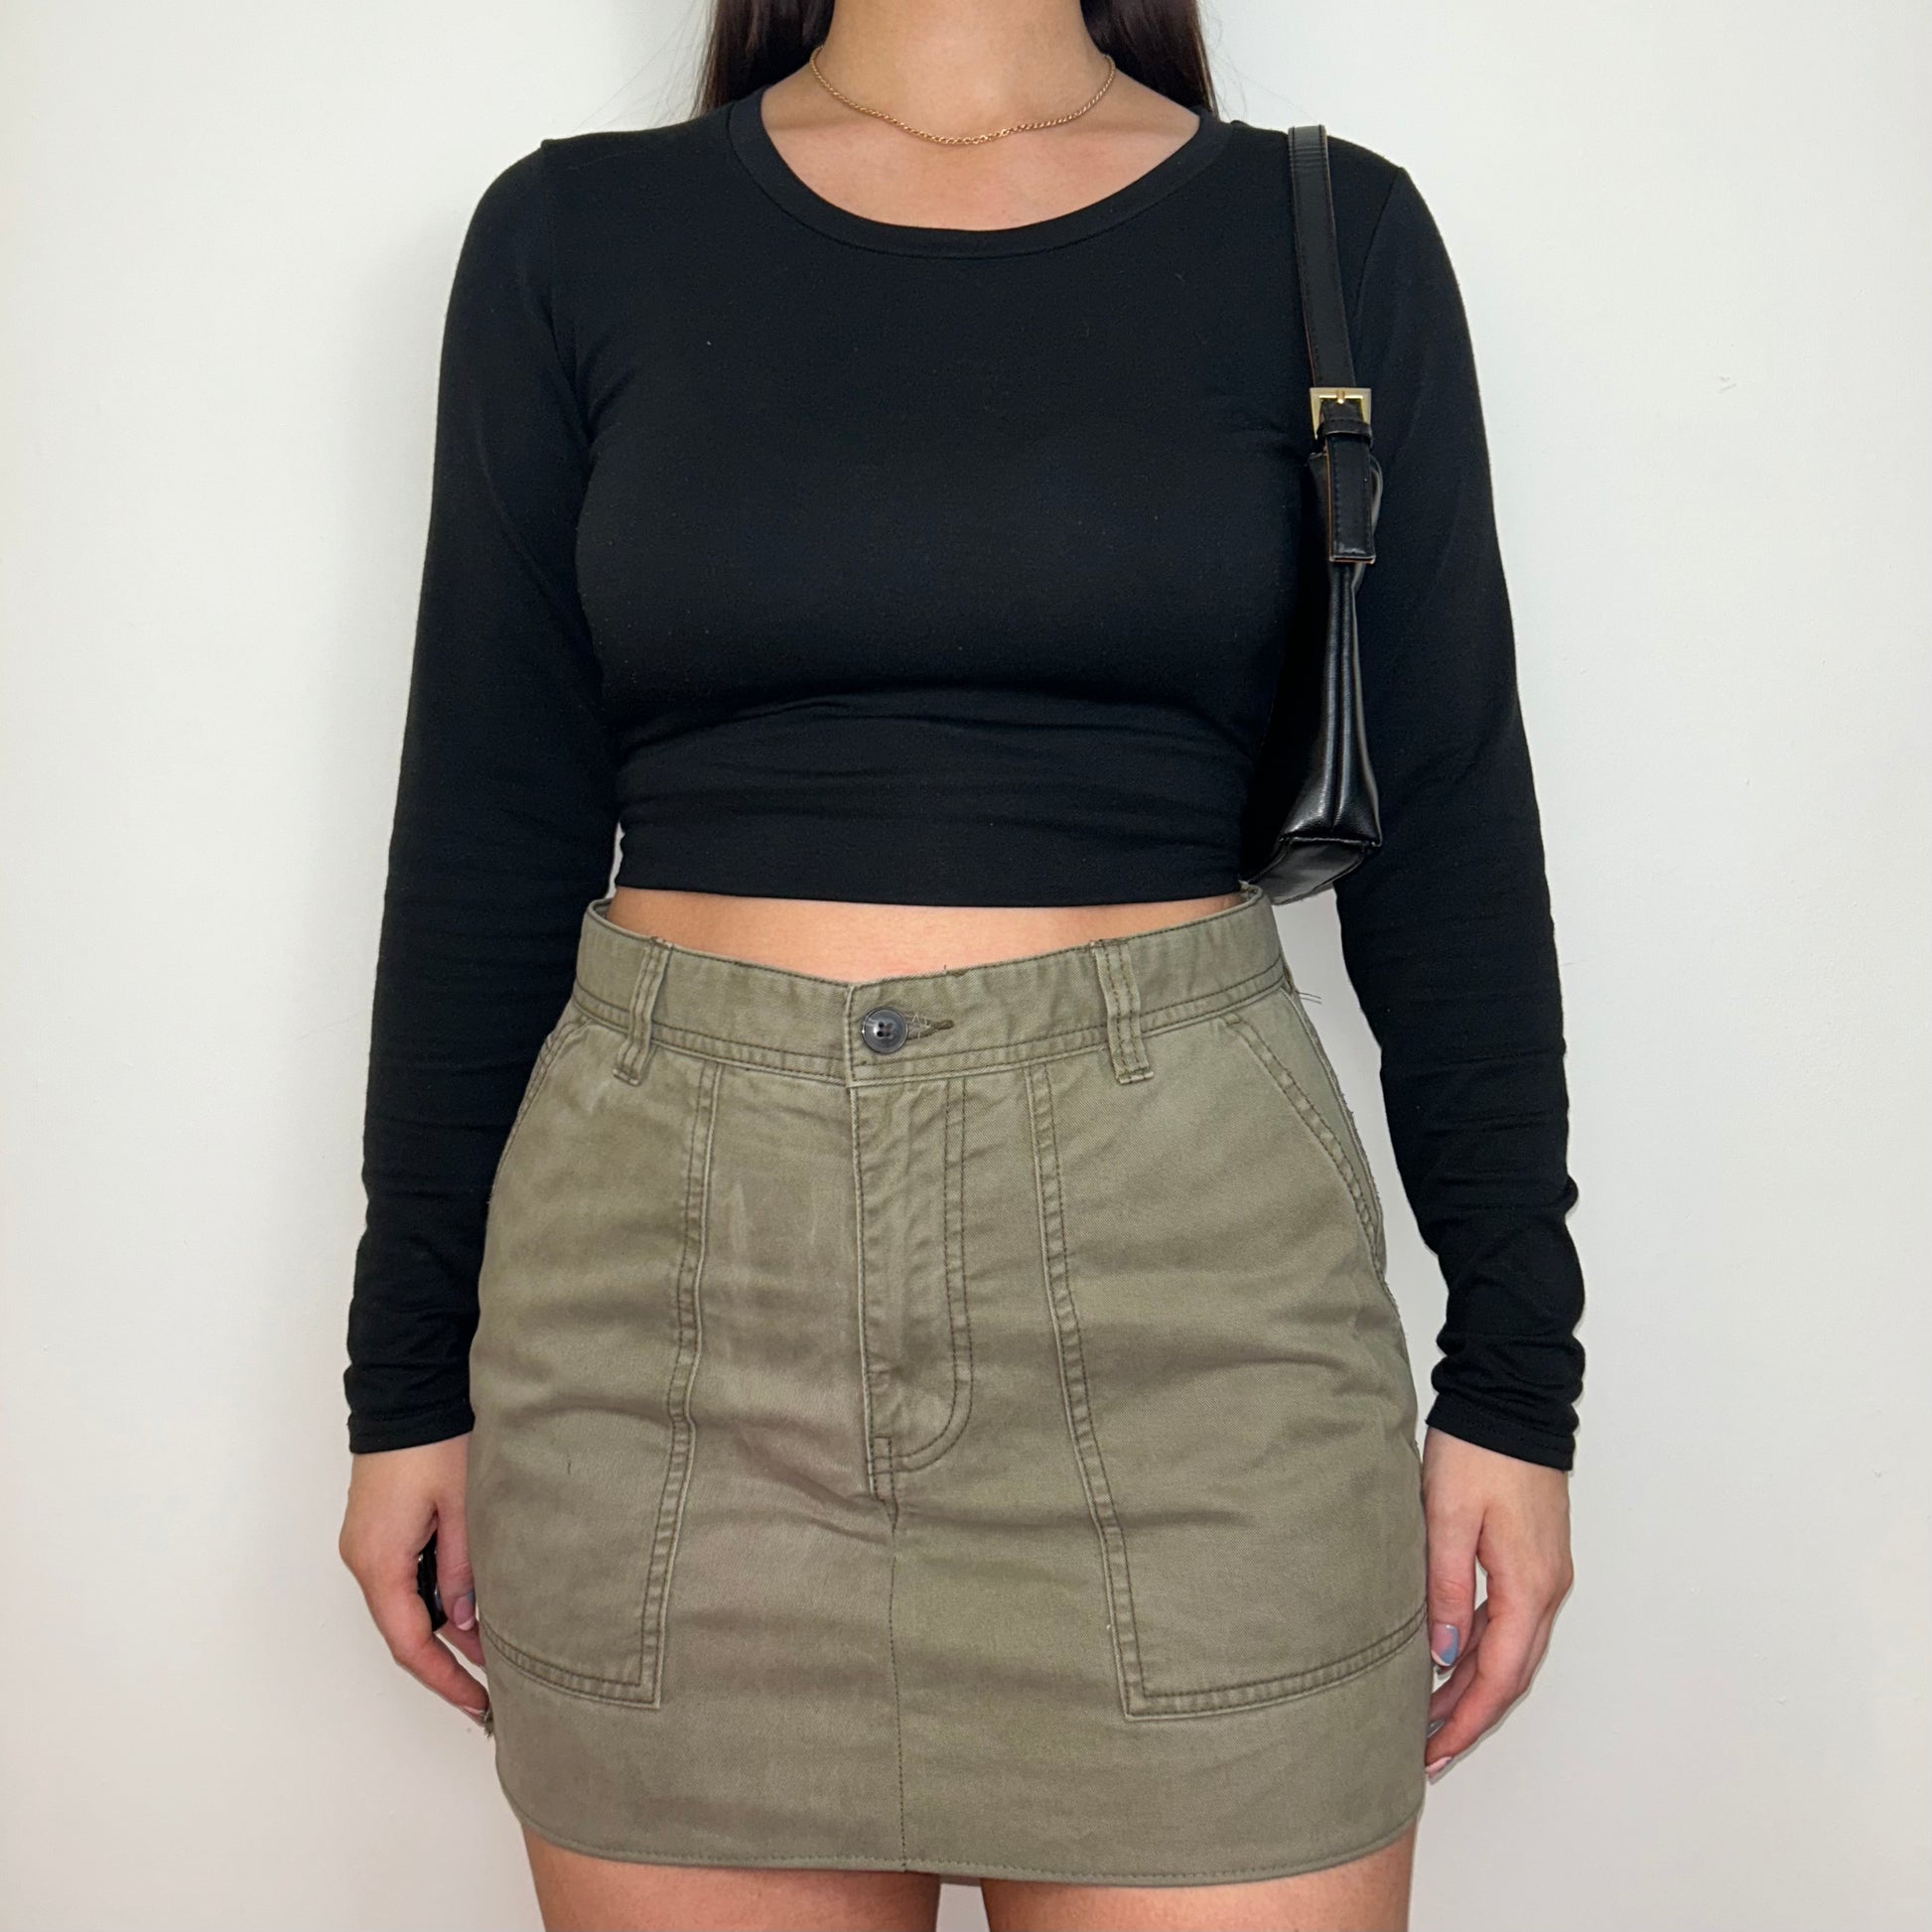 beige cargo mini skirt shown on a model wearing a long sleeve black top and a black shoulder bag